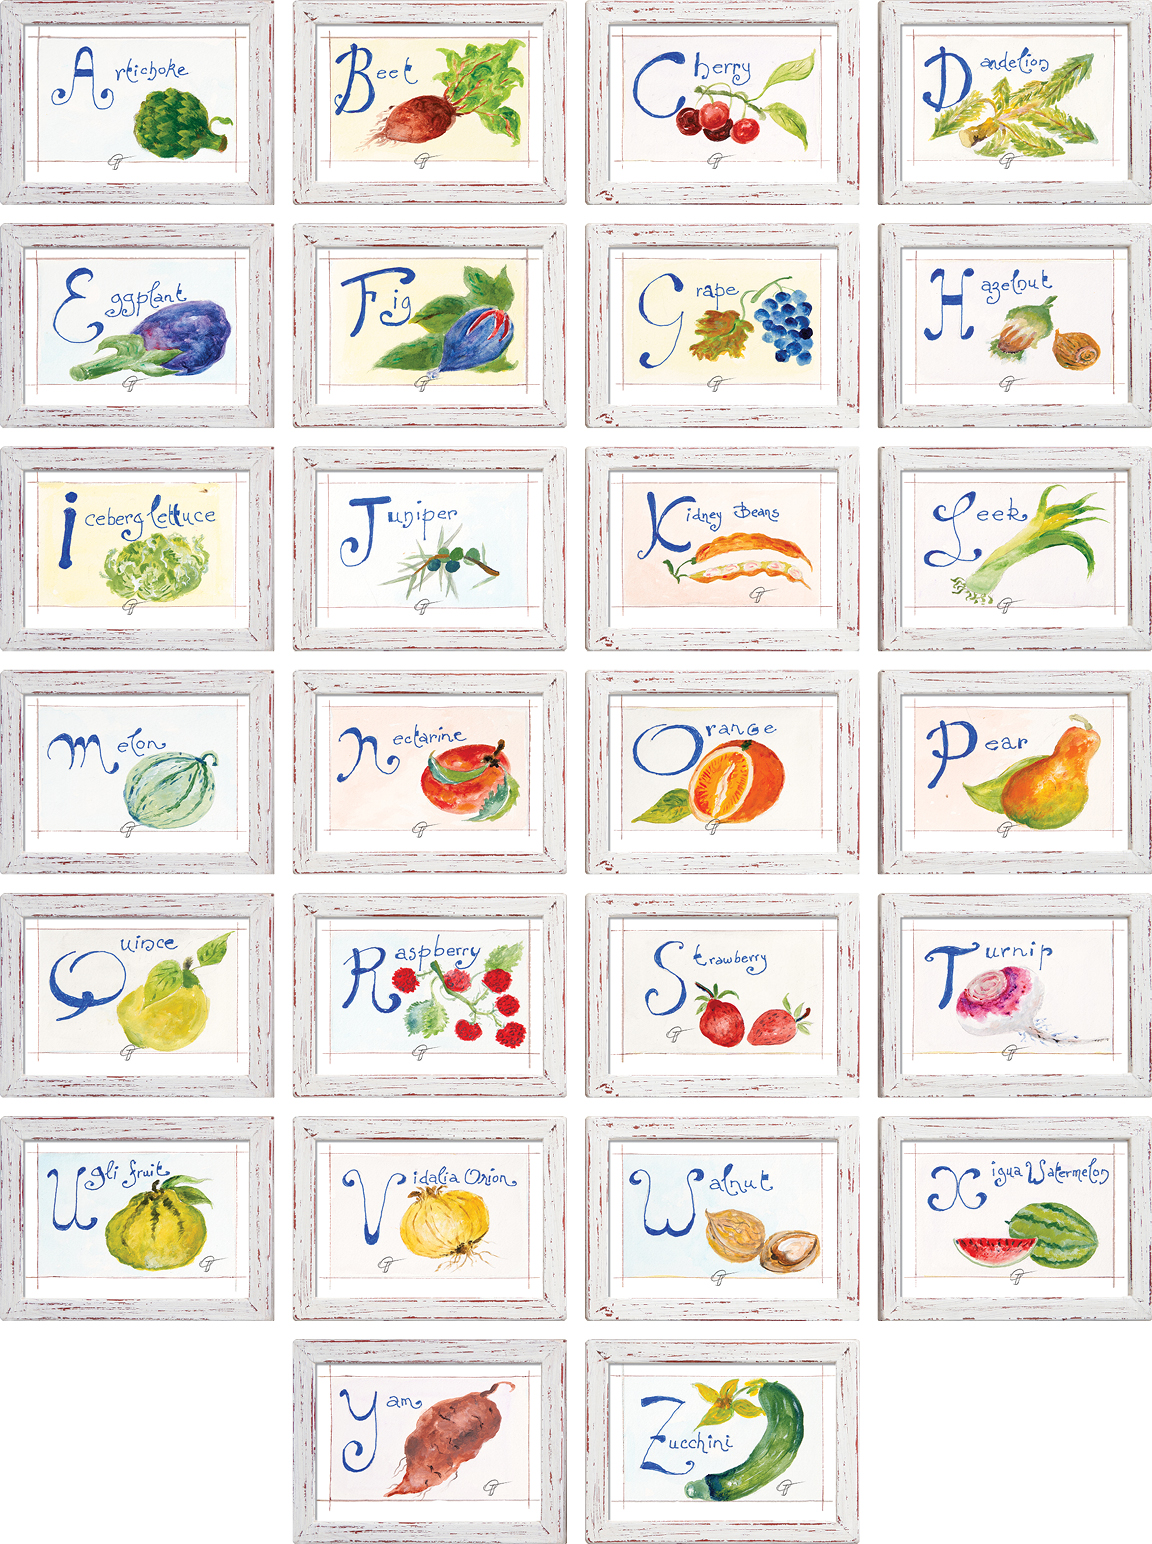 Jacques Pepin’s Artwork Alphabet Series Individually Signed by Jacques